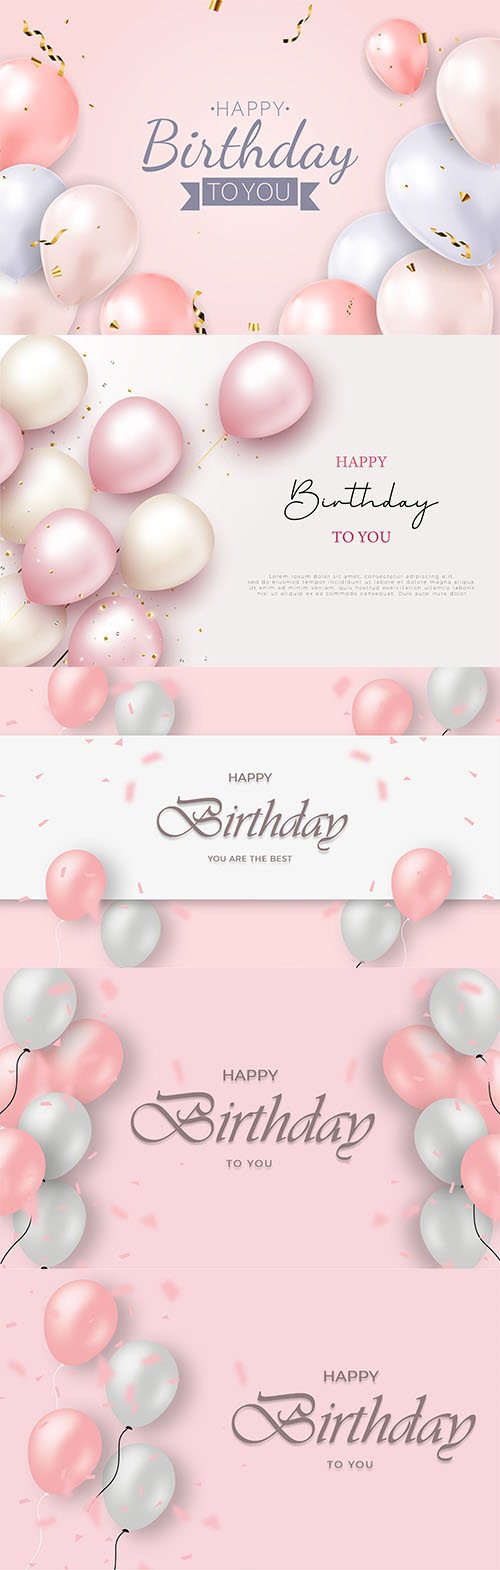 Realistic happy birthday background with pink and white balloons